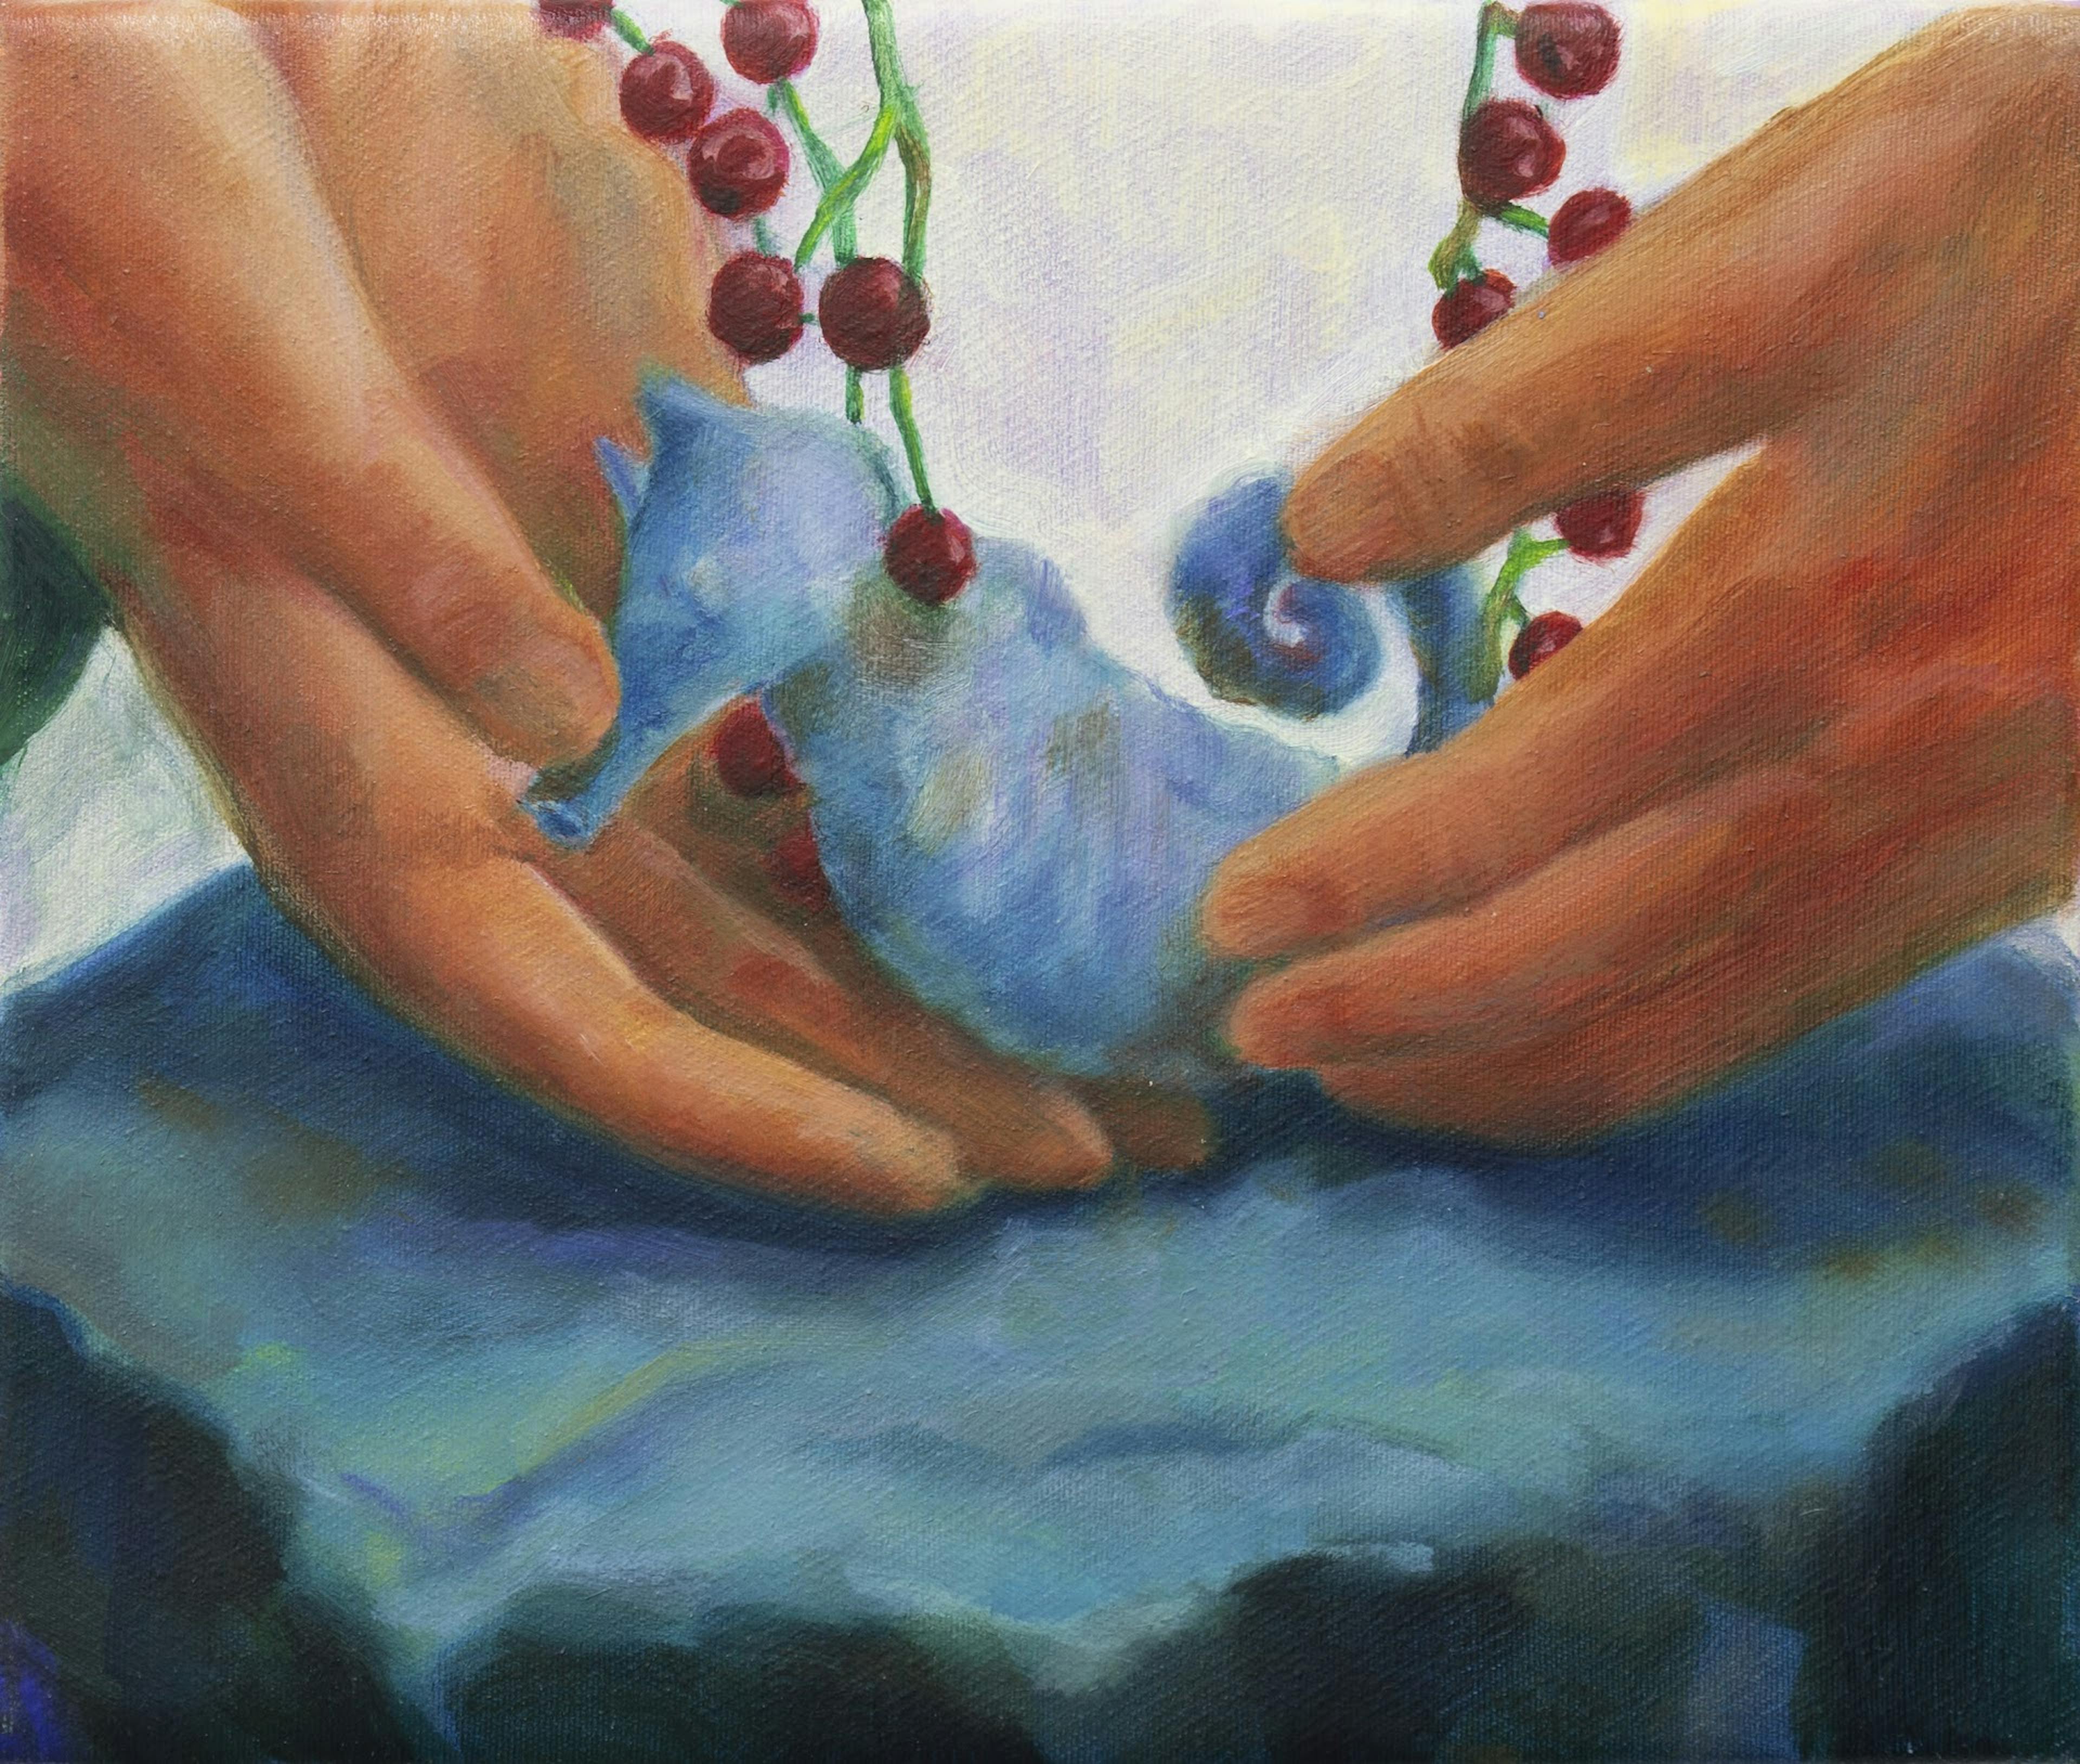 Candid Memories, oil on canvas, 24 x 28 cm